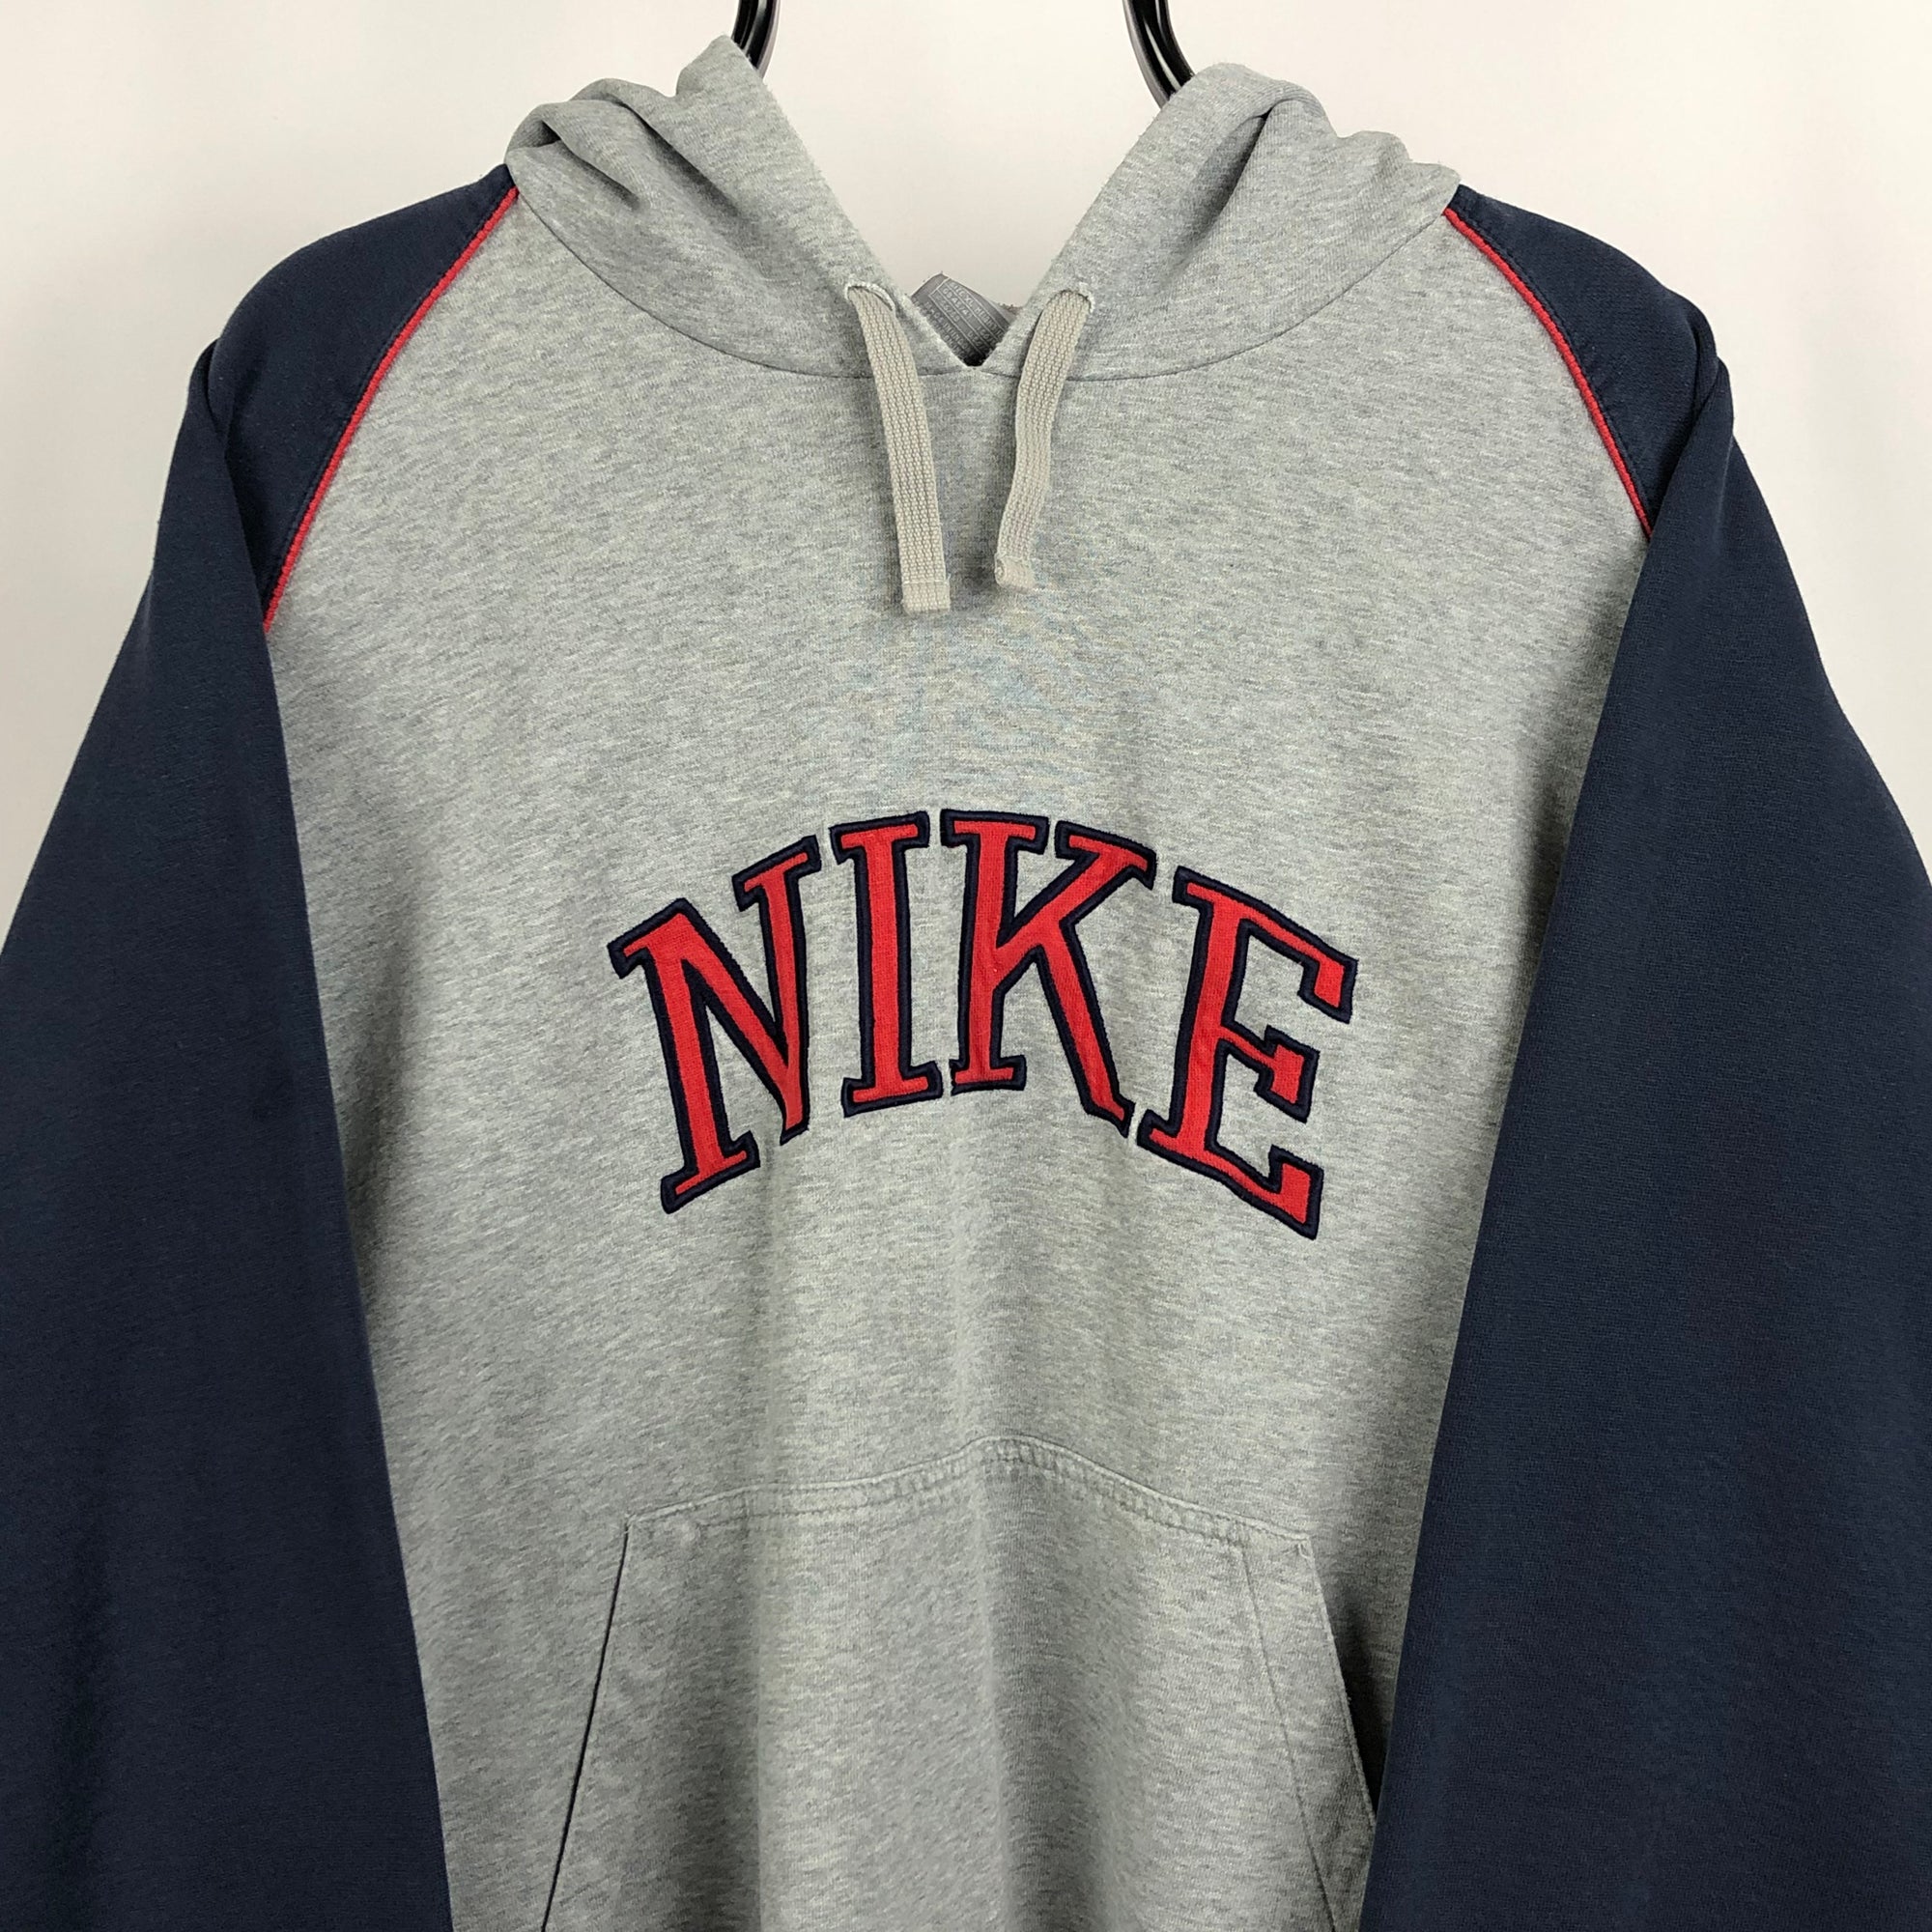 Vintage Nike Embroidered Spellout Hoodie in Grey/Navy/Red - Men's XL/Women's XXL